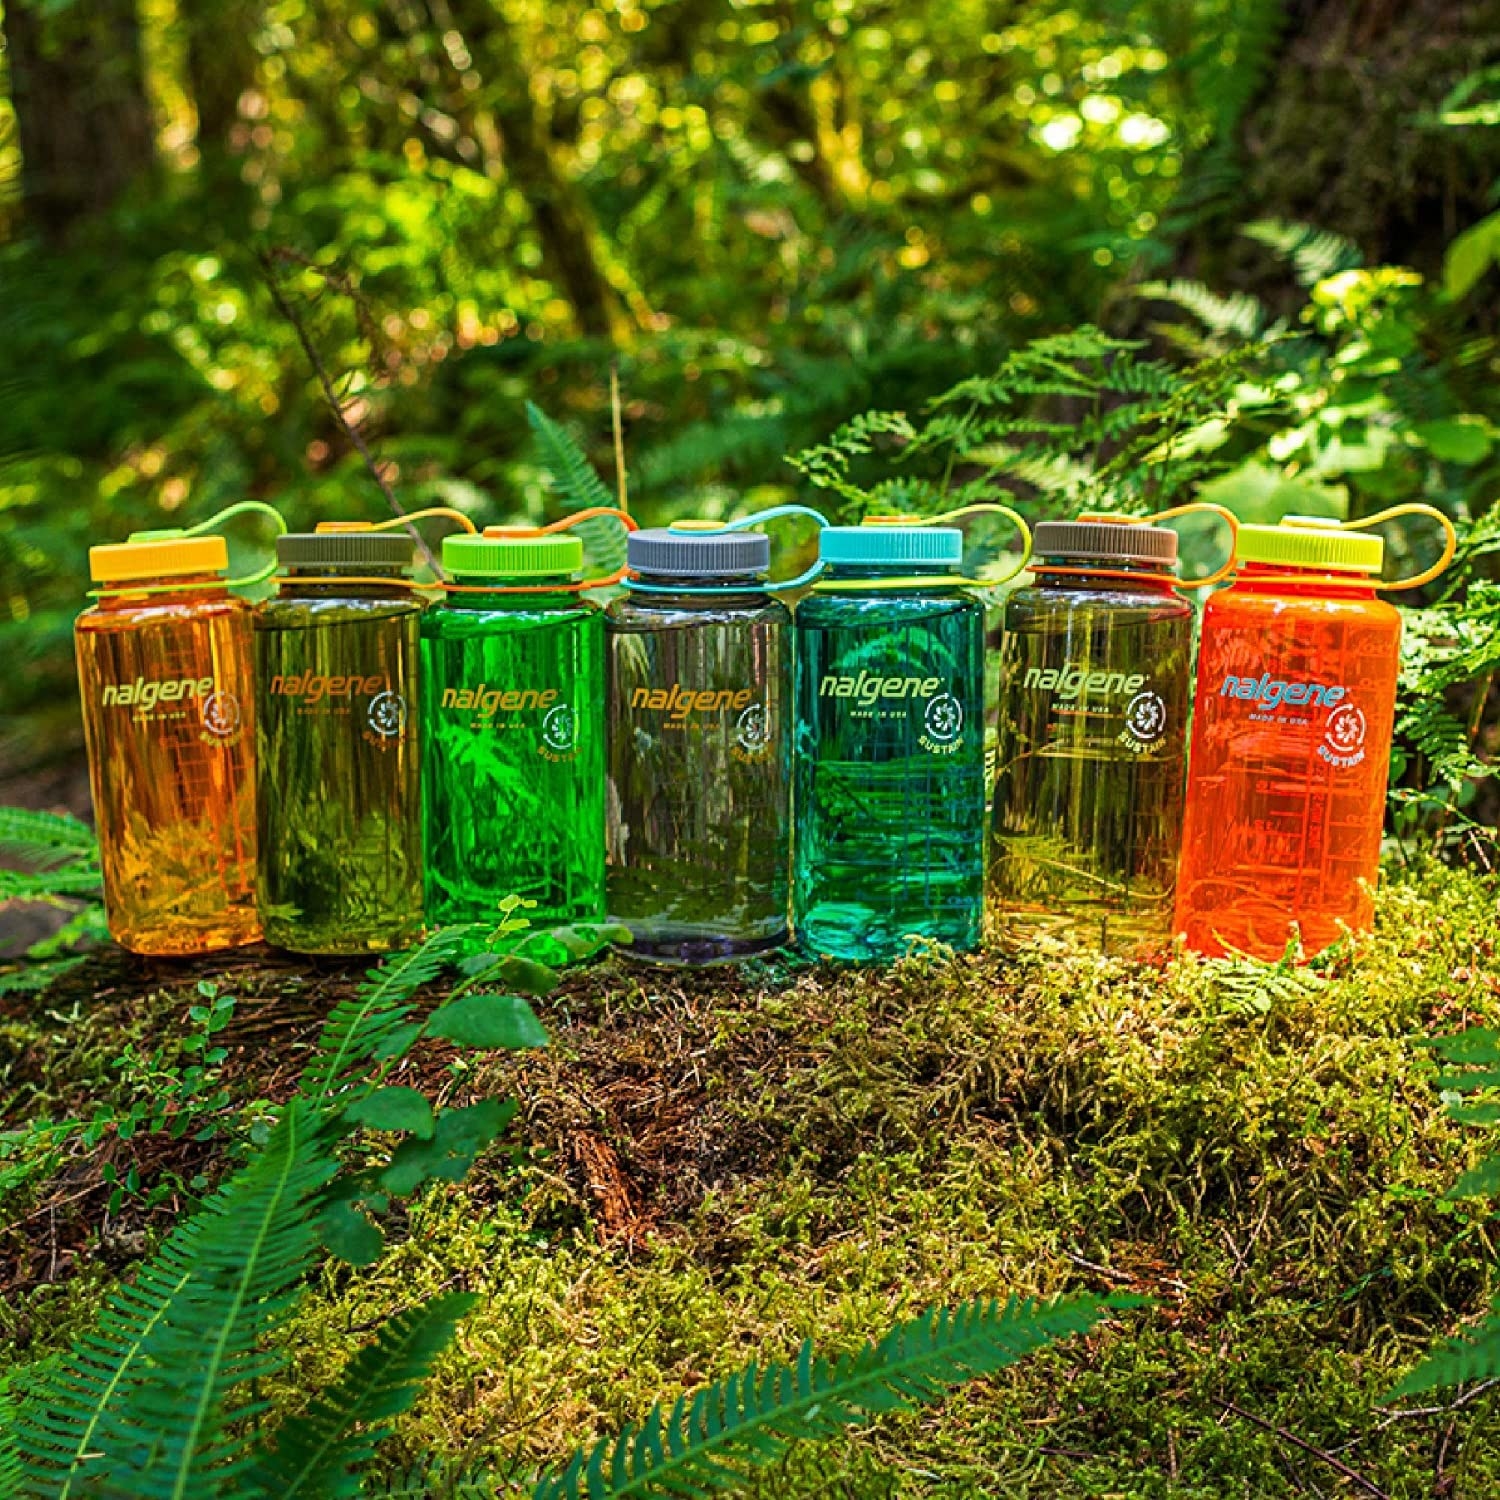 A collection of bottles lined up in a forest